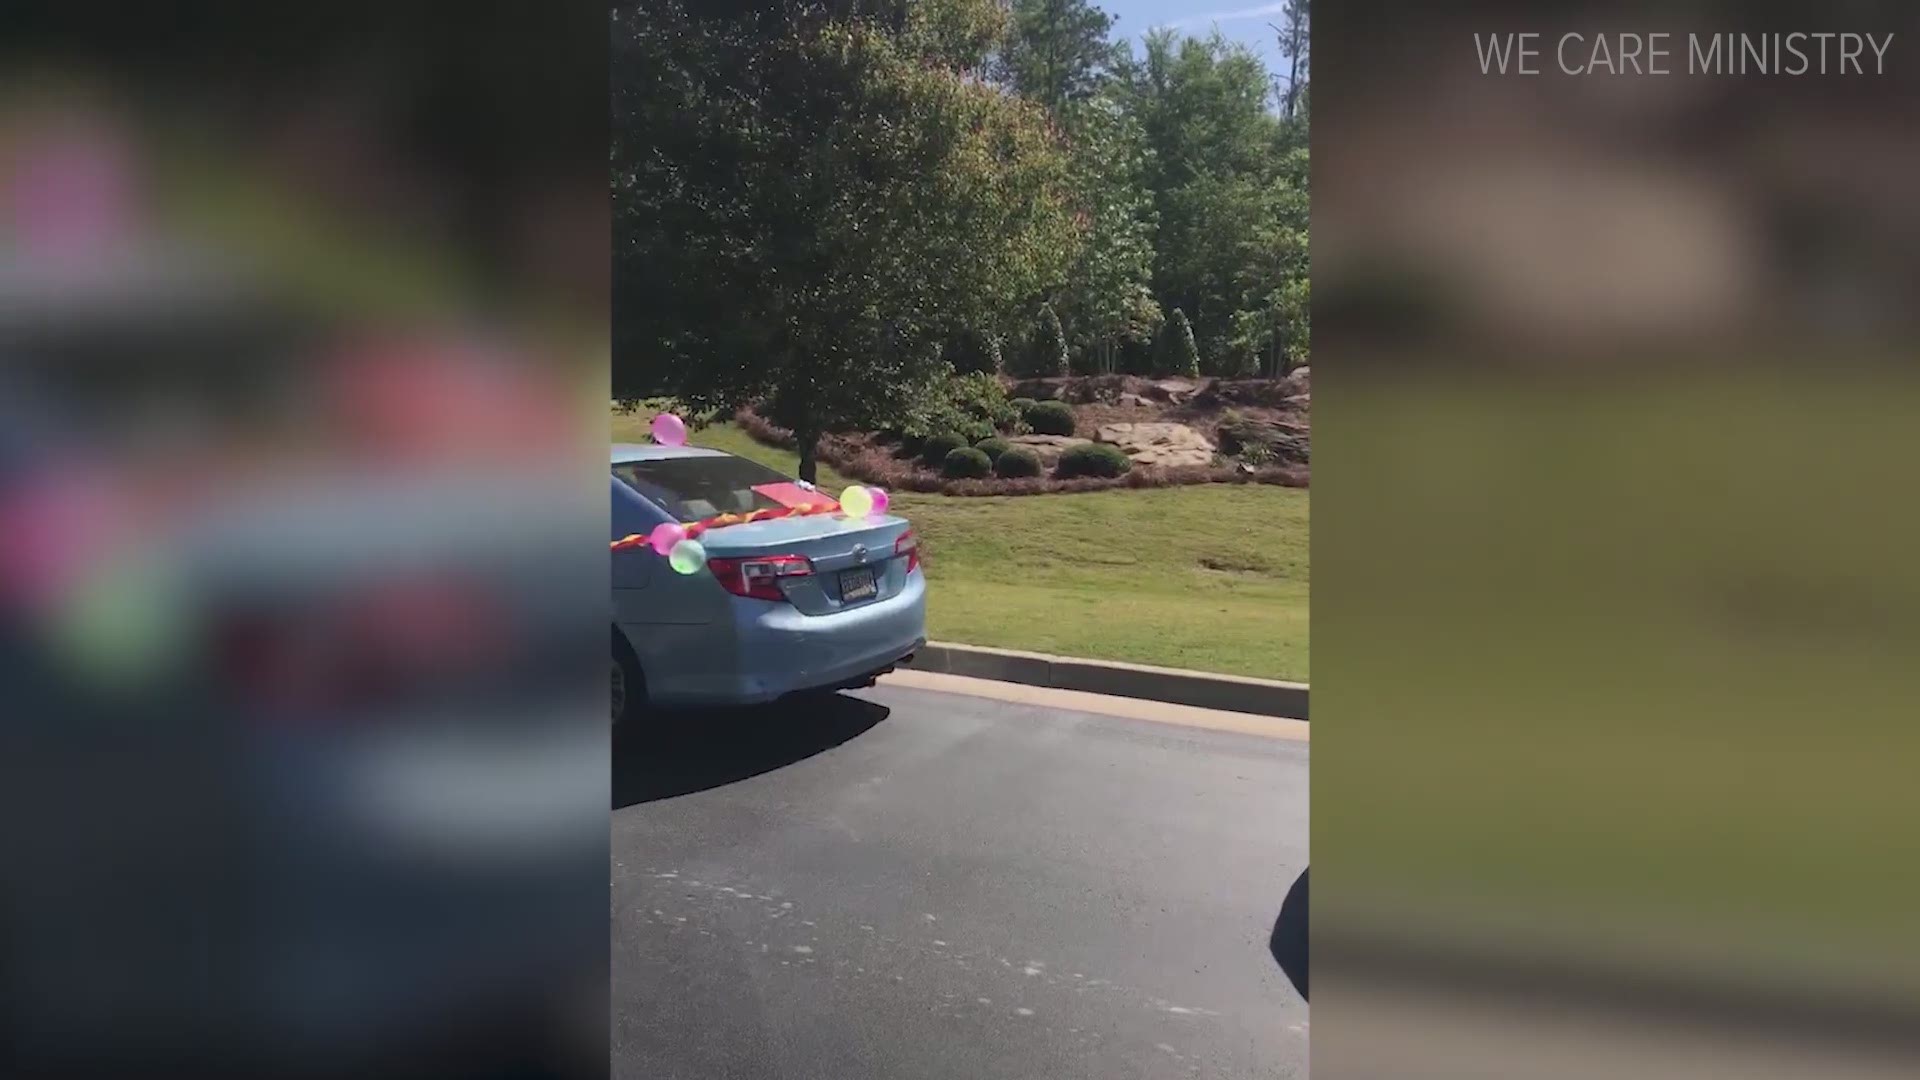 Mothers at one Macon nursing home were treated to a special surprise on Mother's Day. Dozens of cars lined up for a parade around 11 a.m.